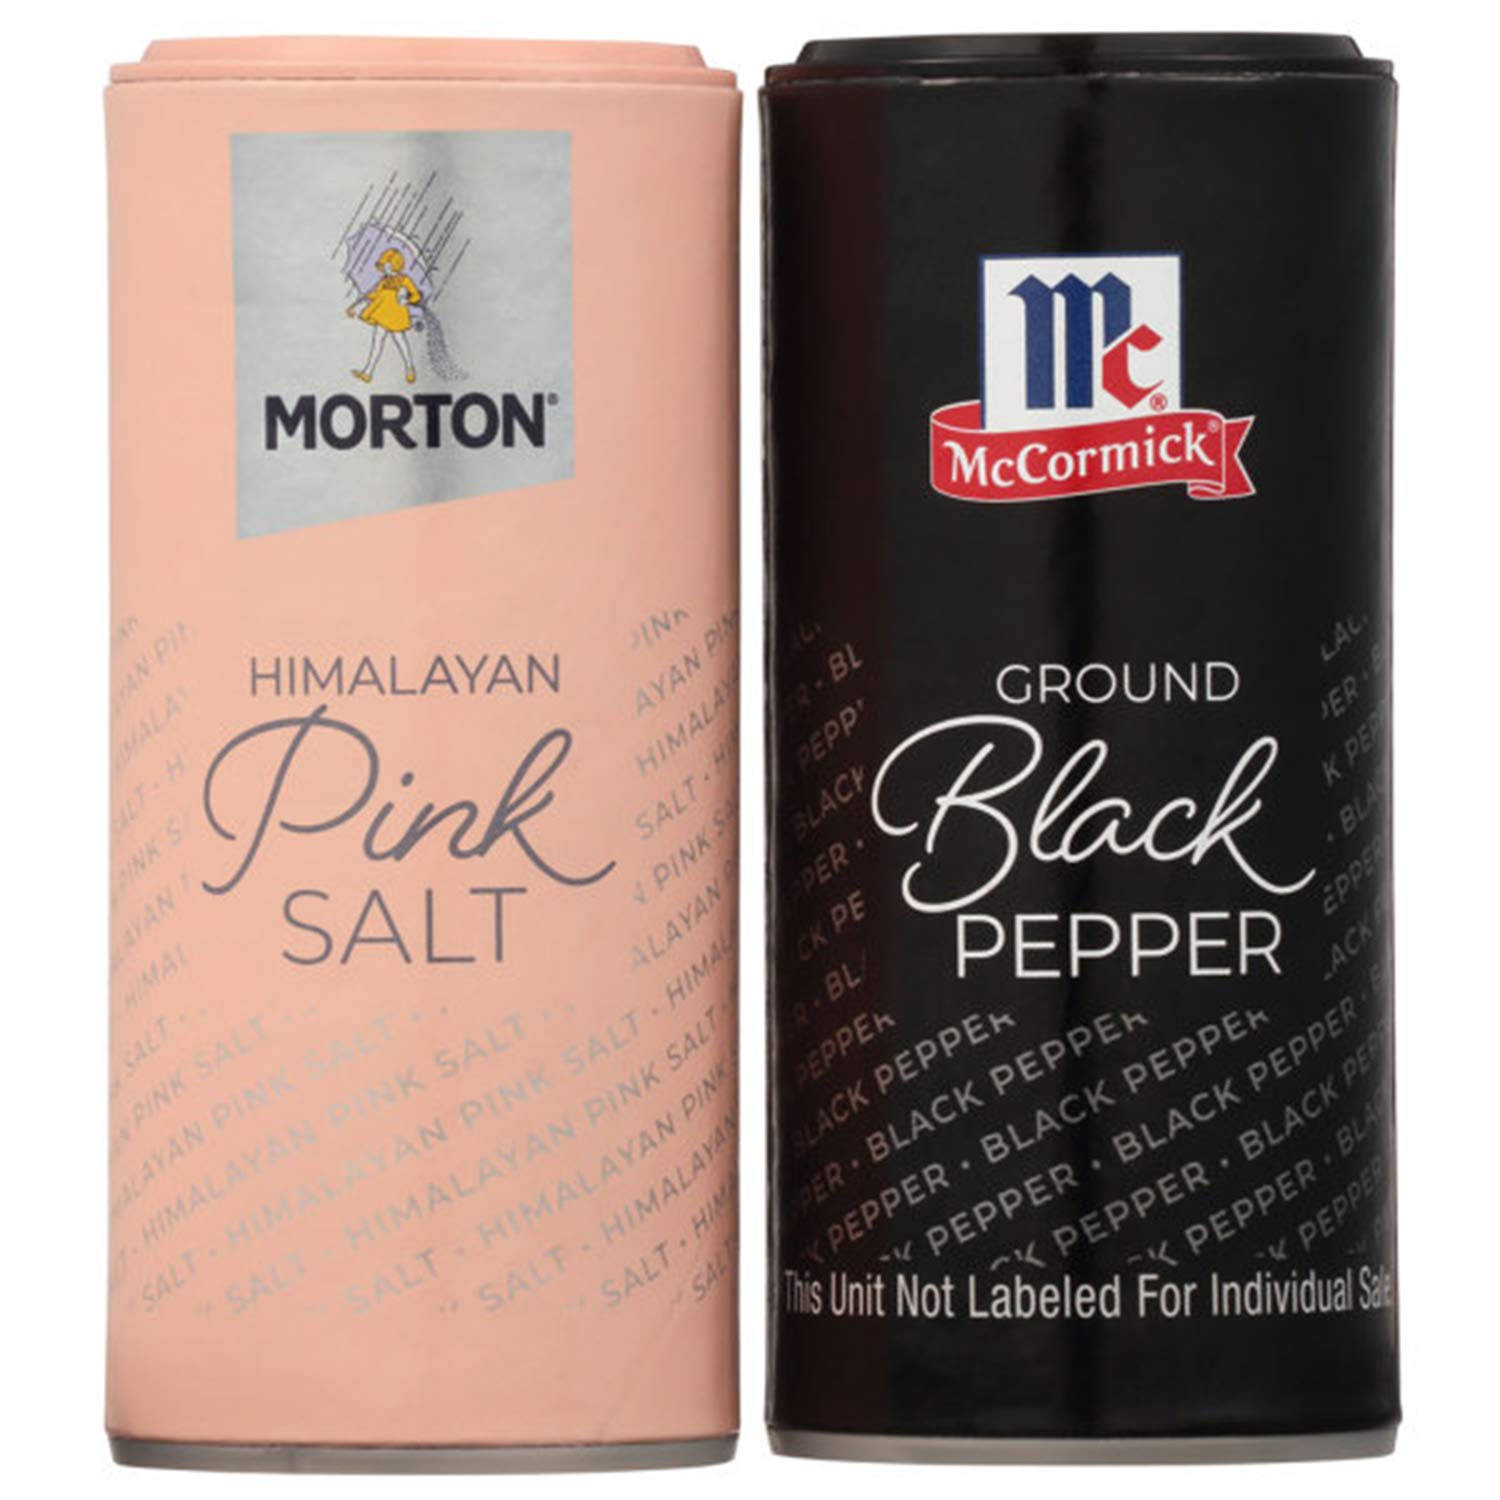 Morton All-Natural Himalayan Pink Salt & McCormick Pepper Shakers, 5.25  Ounce Salt and Pepper Shaker 5.25 Ounce (Pack of 1)